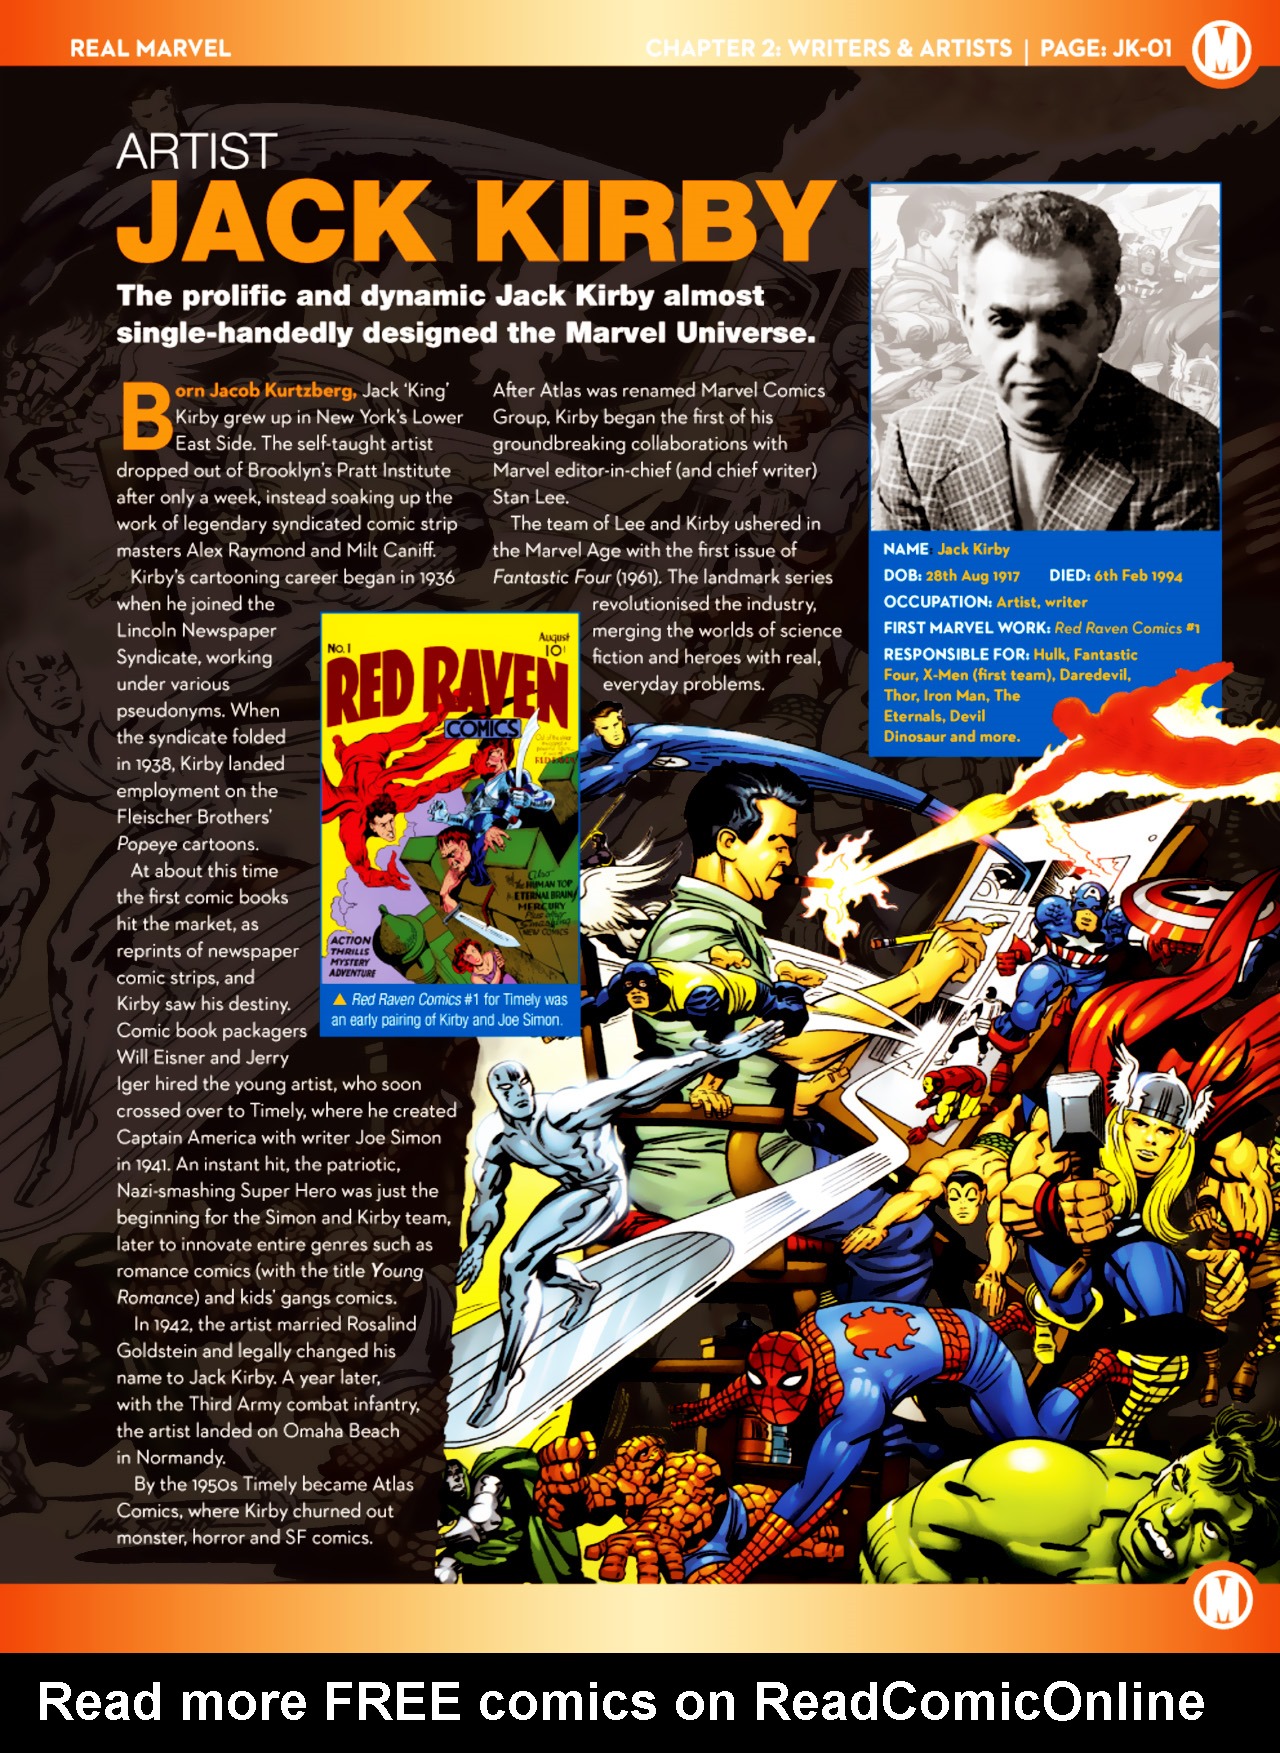 Read online Marvel Fact Files comic -  Issue #6 - 18